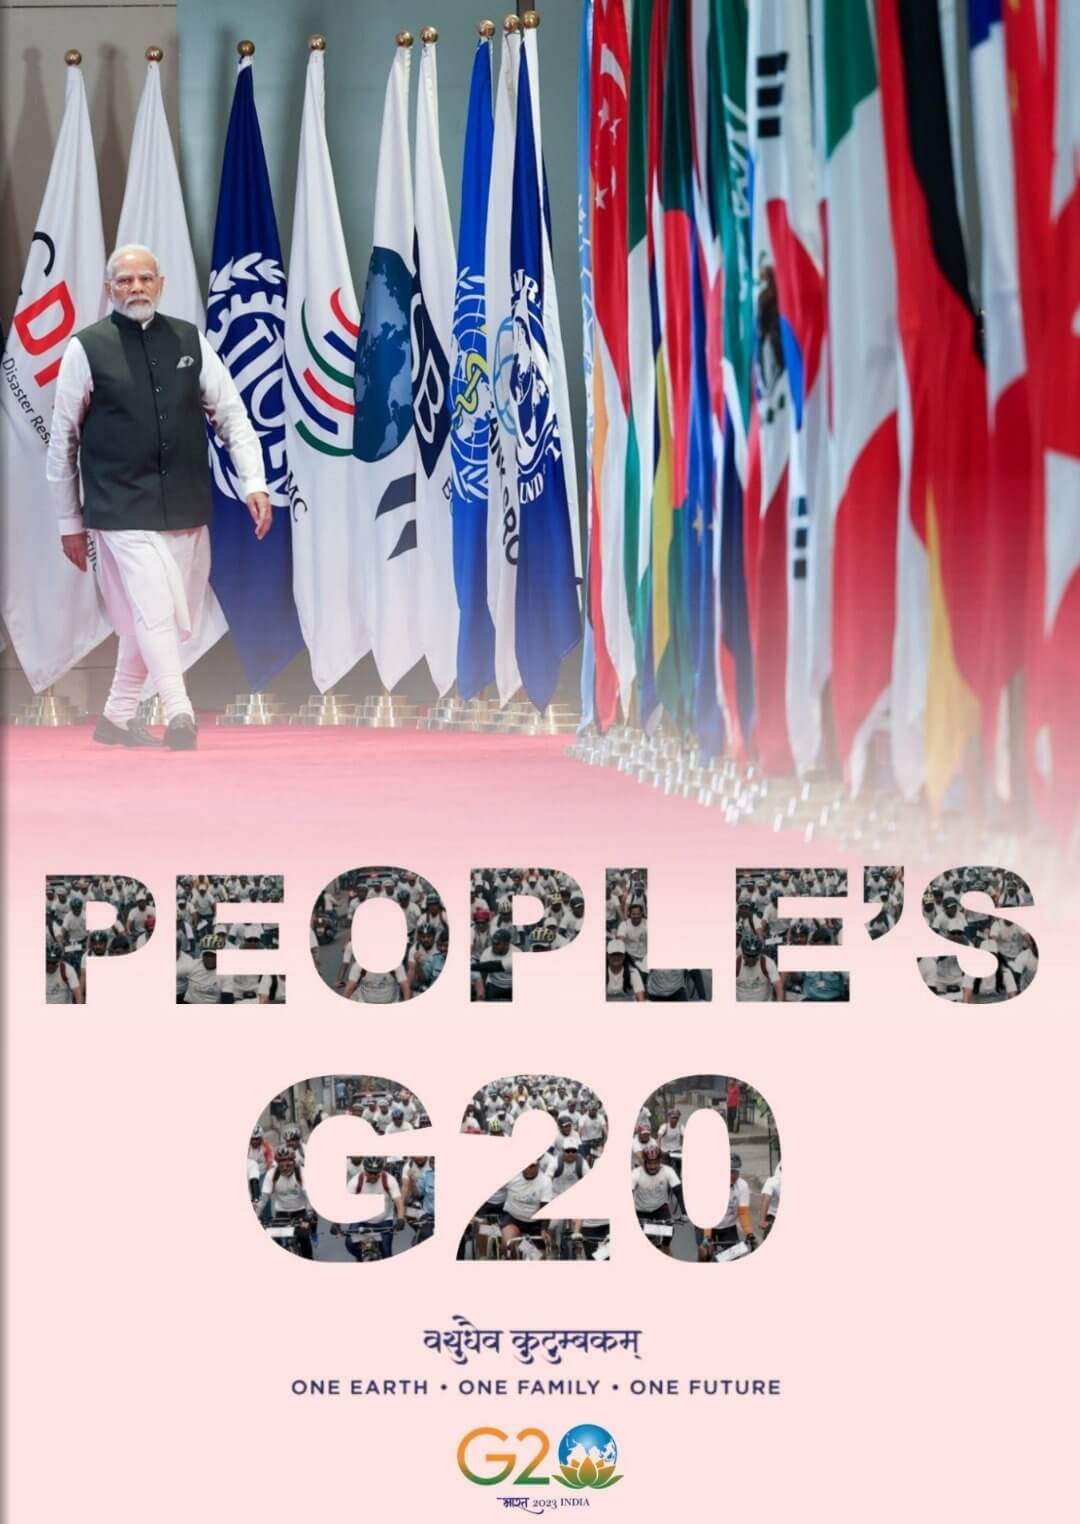 “People’s G20” - An eBook on India’s G20 Presidency